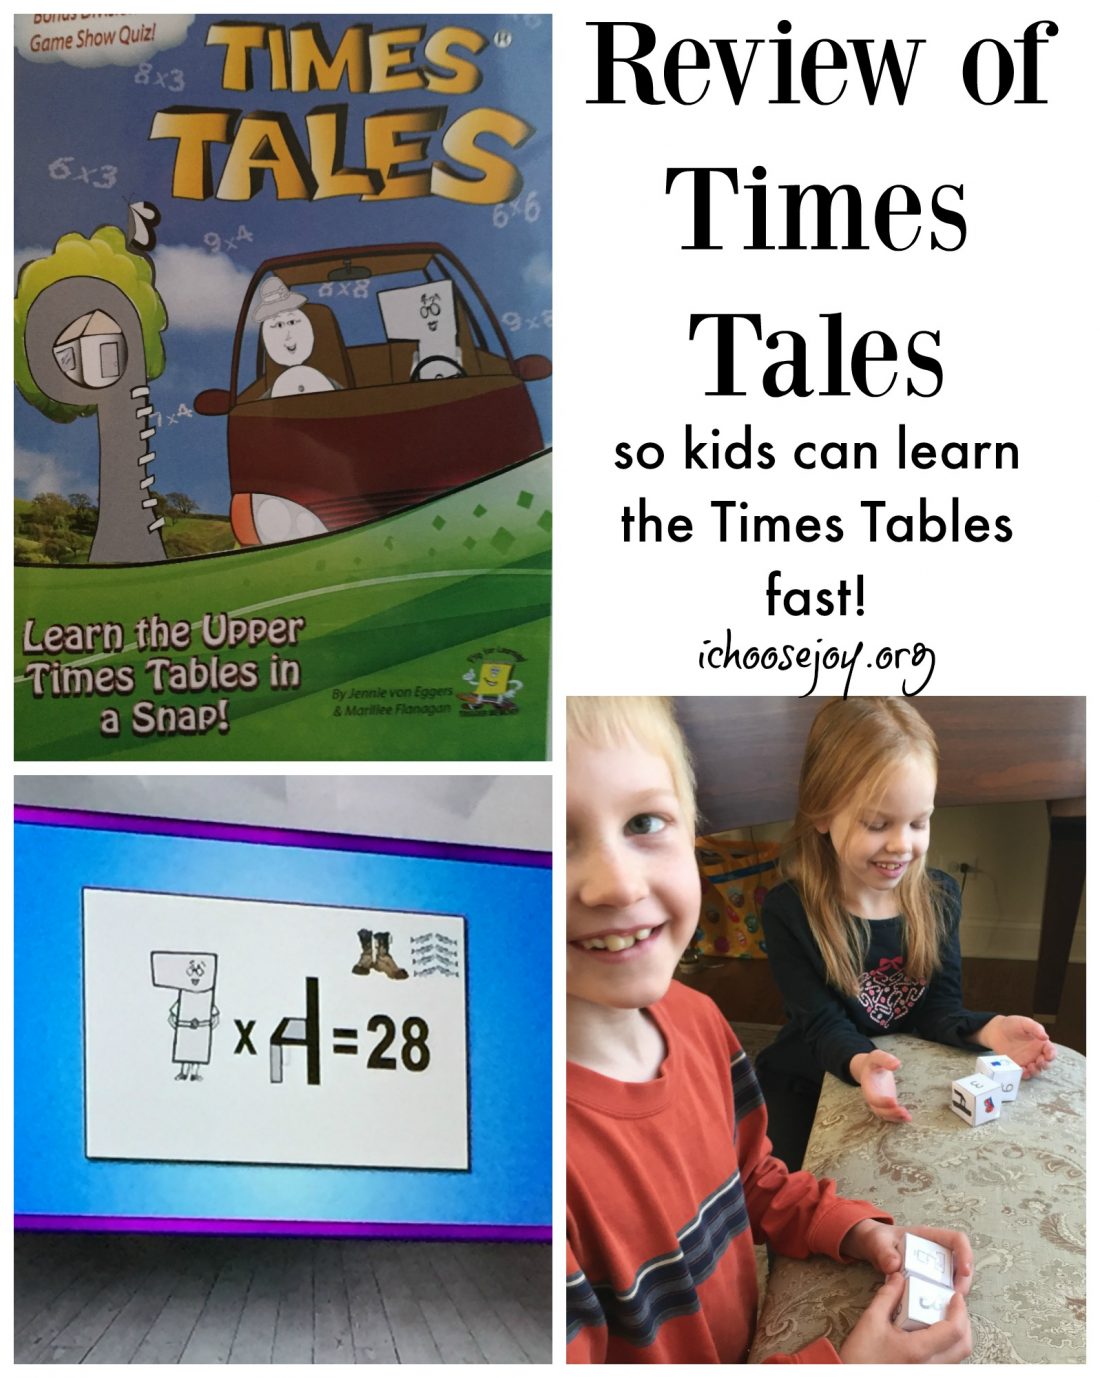 Review: Times Tales DVD to learn times tables fast!